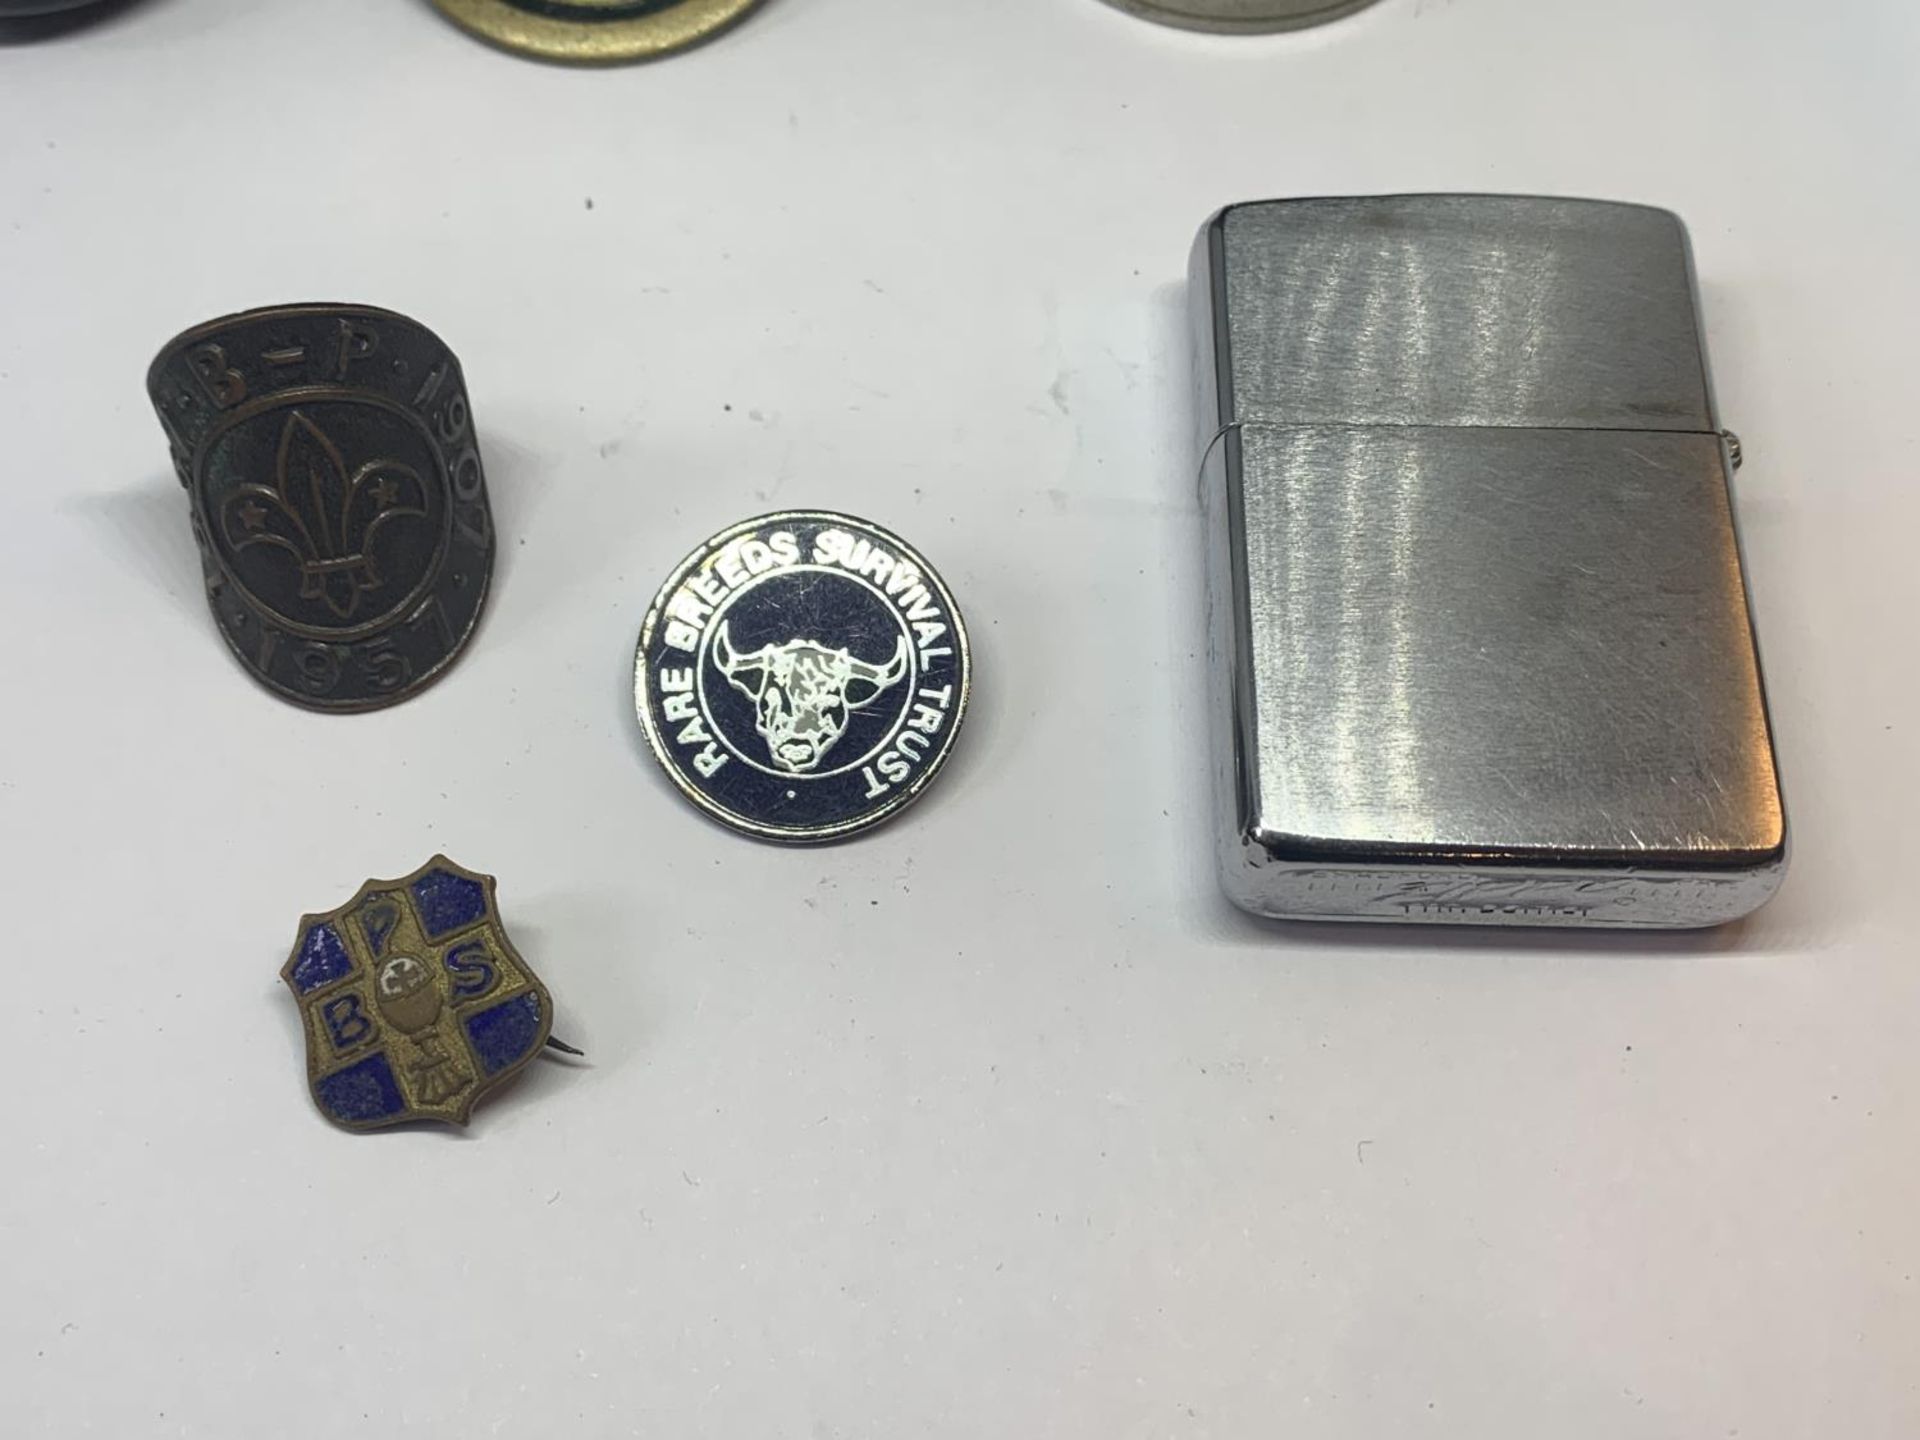 VARIOUS COLLECTABLE ITEMS TO IN CLUDE A ZIPPO LIGHTER, VINTAGE COMPASS, SCOUTING BADGES ETC - Image 6 of 6